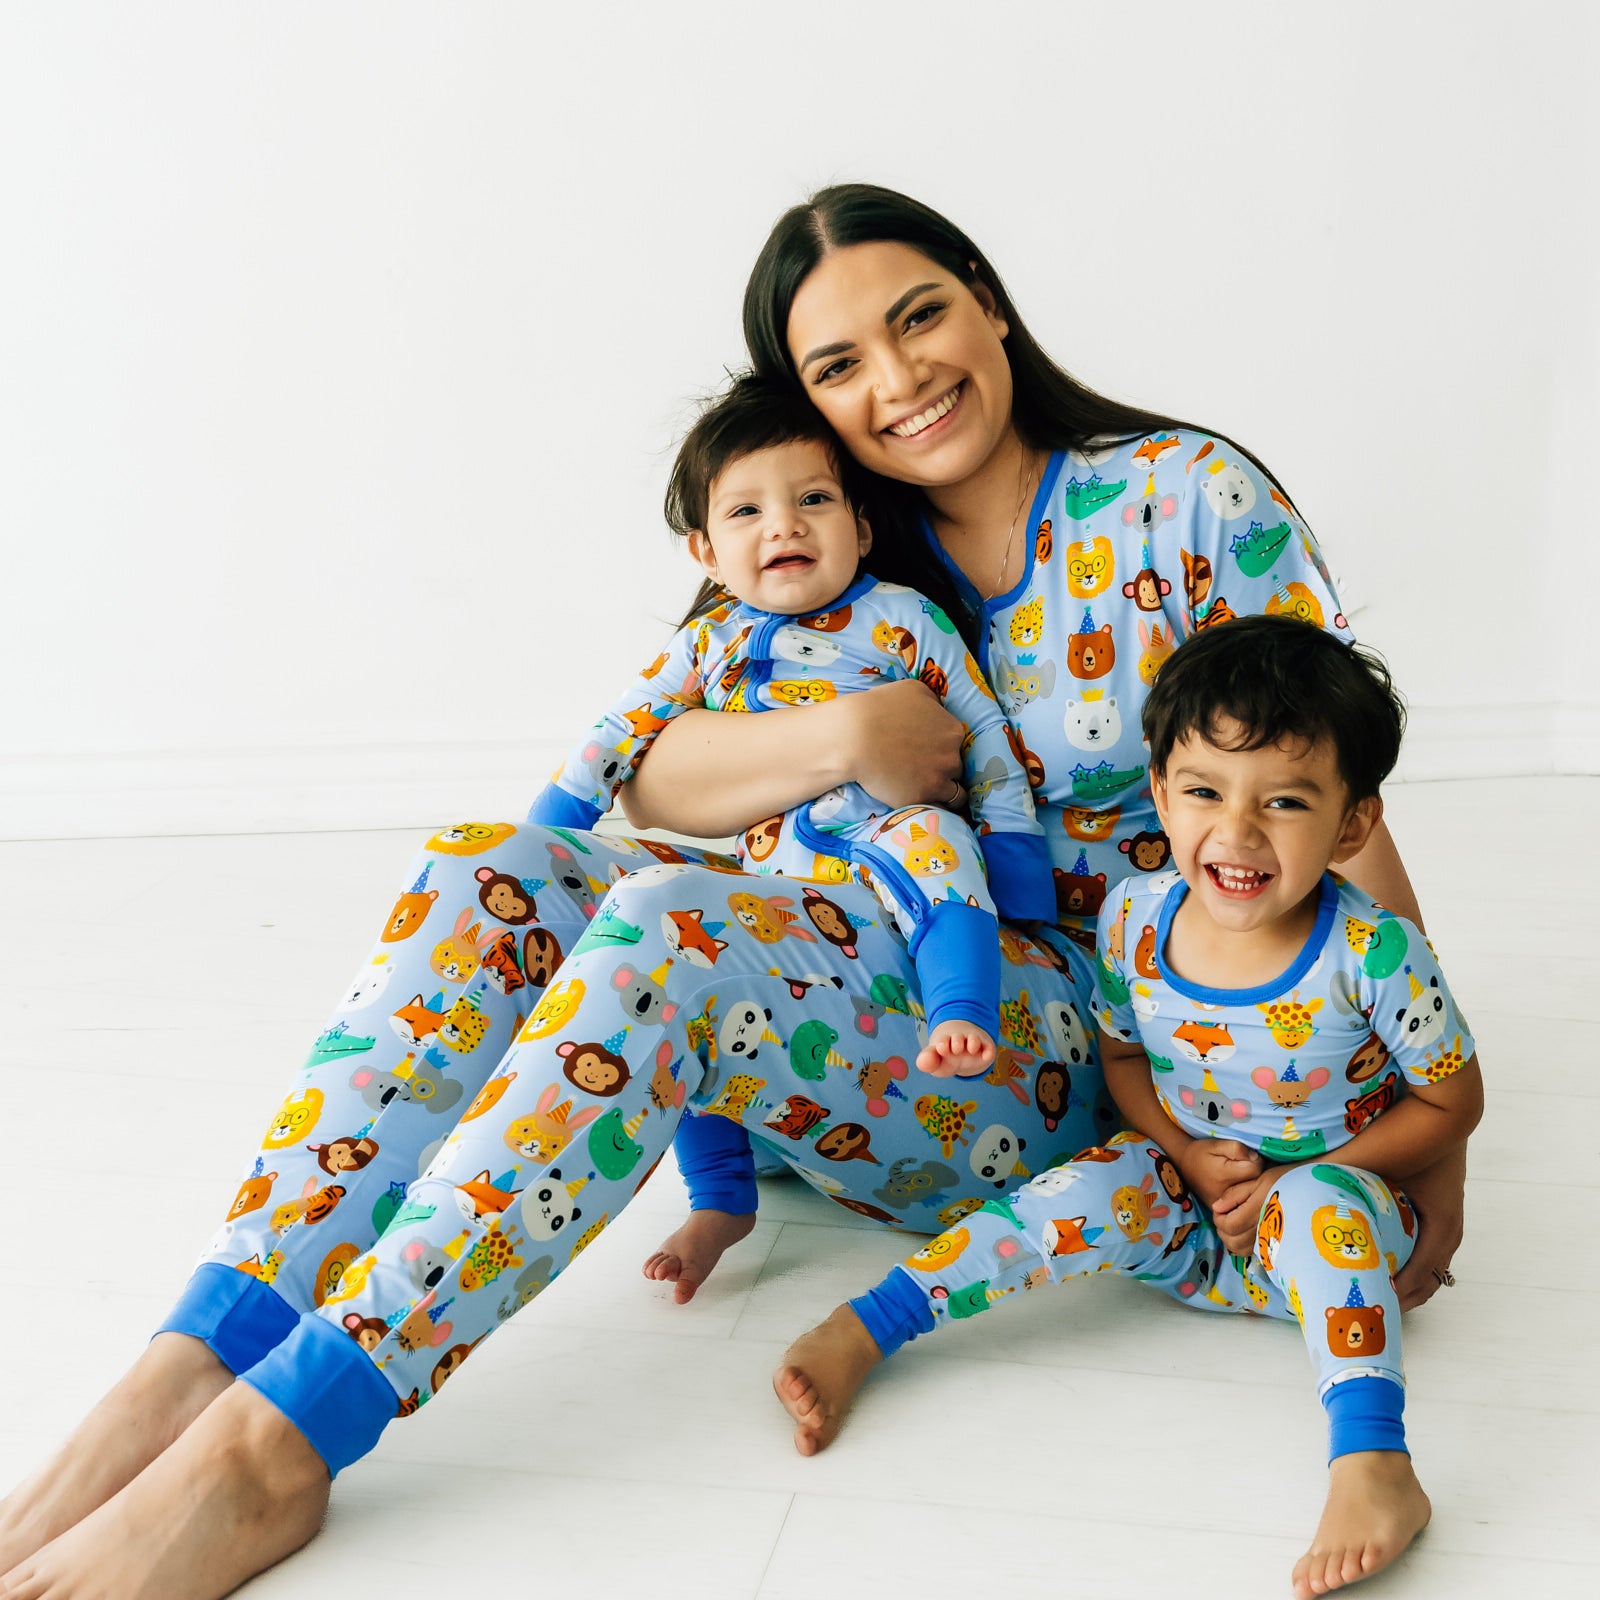 Woman and her two children sitting and posing. Woman is wearing women's Blue Party Pals pj top and matching women's pj pants. Kids are wearing matching Blue Party Pals pjs in zippy and two piece styles.